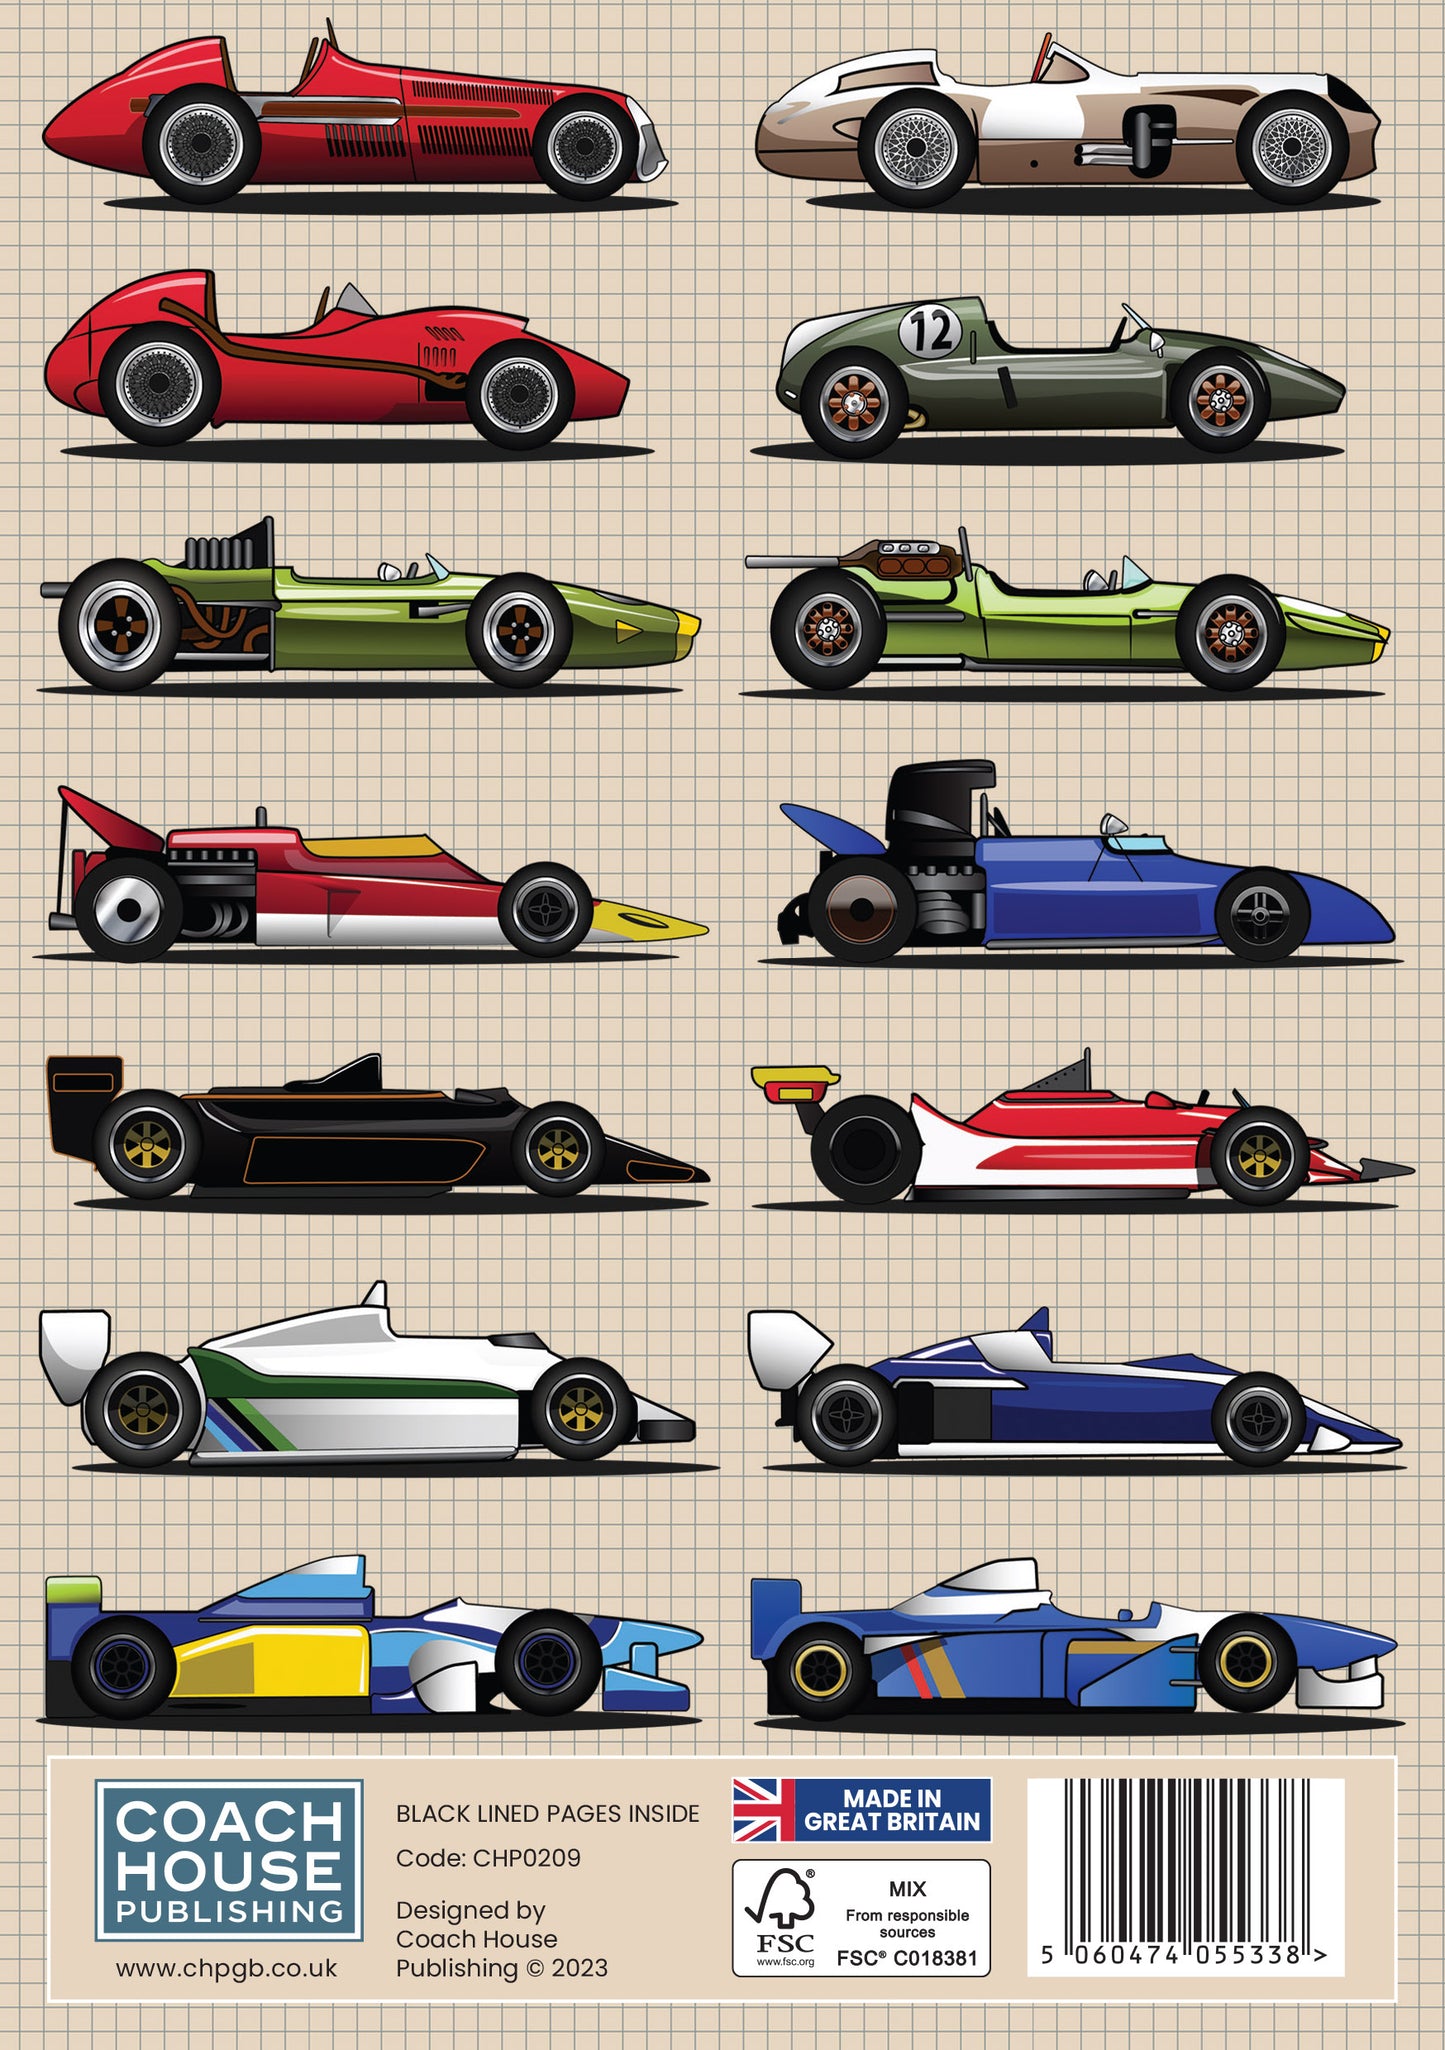 Grand Prix Racing Cars Softback Notebook (A5 120 Page Lined)